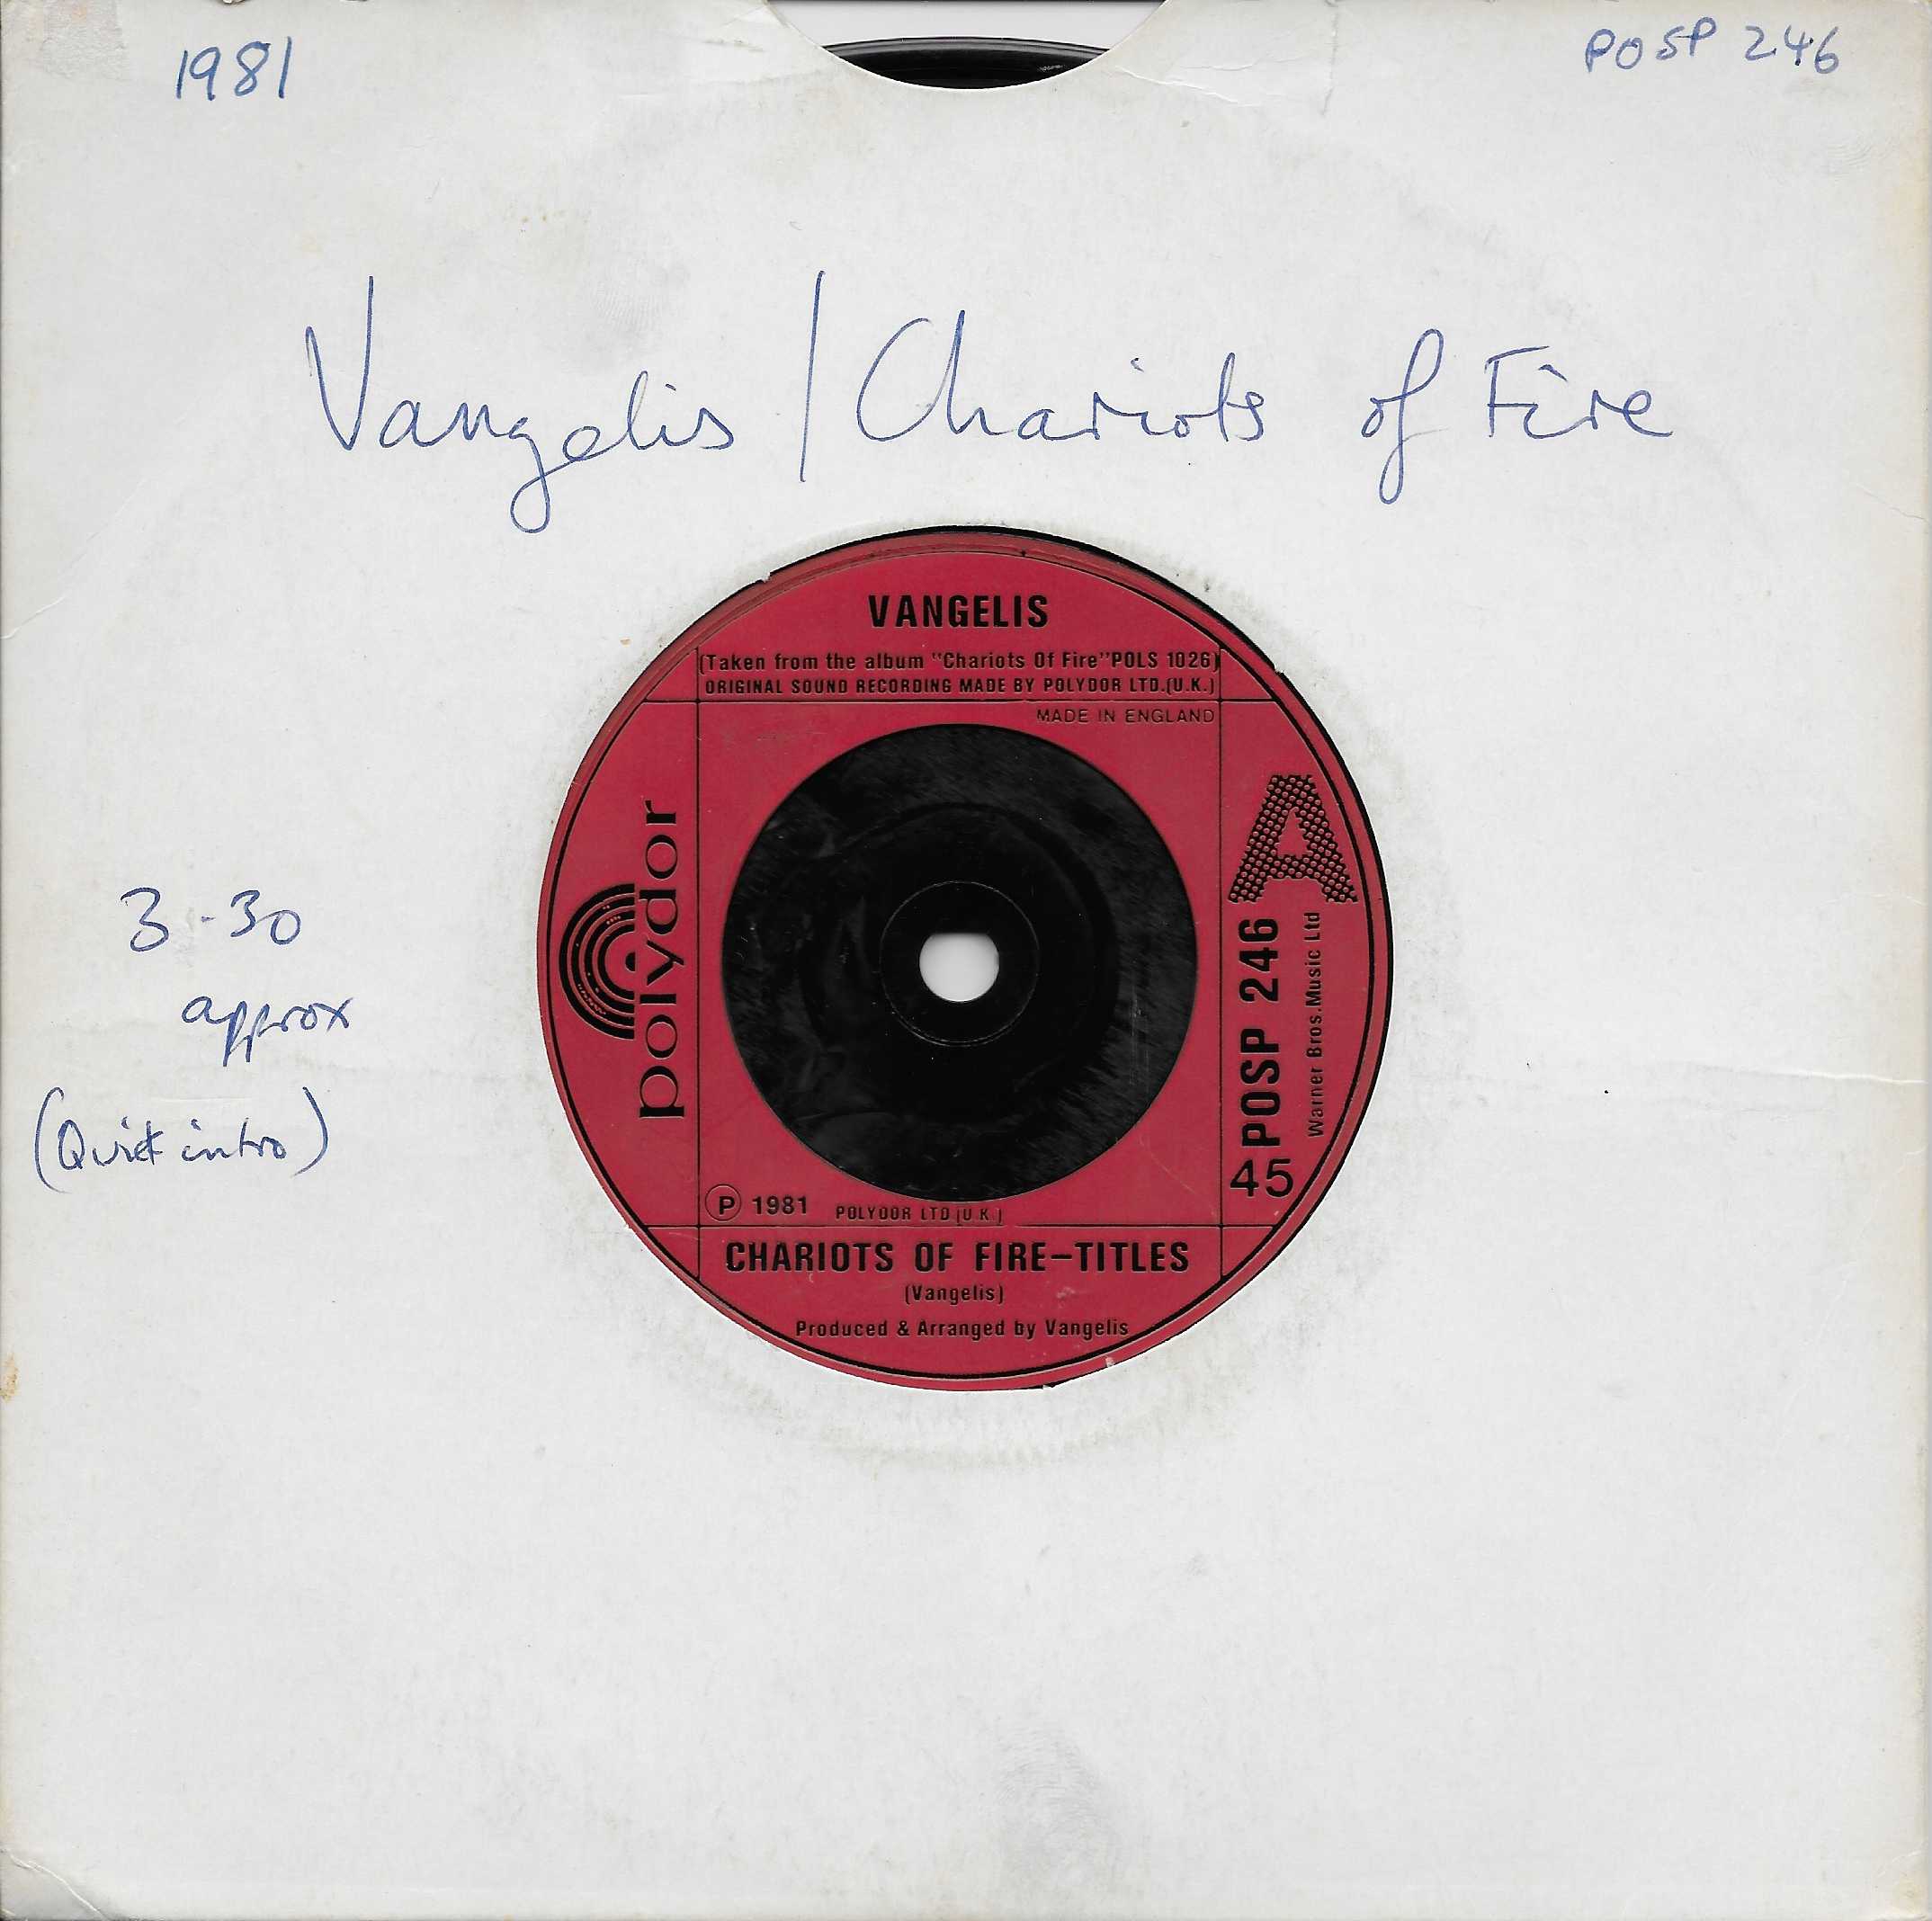 Picture of POSP 246 Chariots of fire (1984 / 8 Olympic grandstand) by artist Vangelis from the BBC records and Tapes library